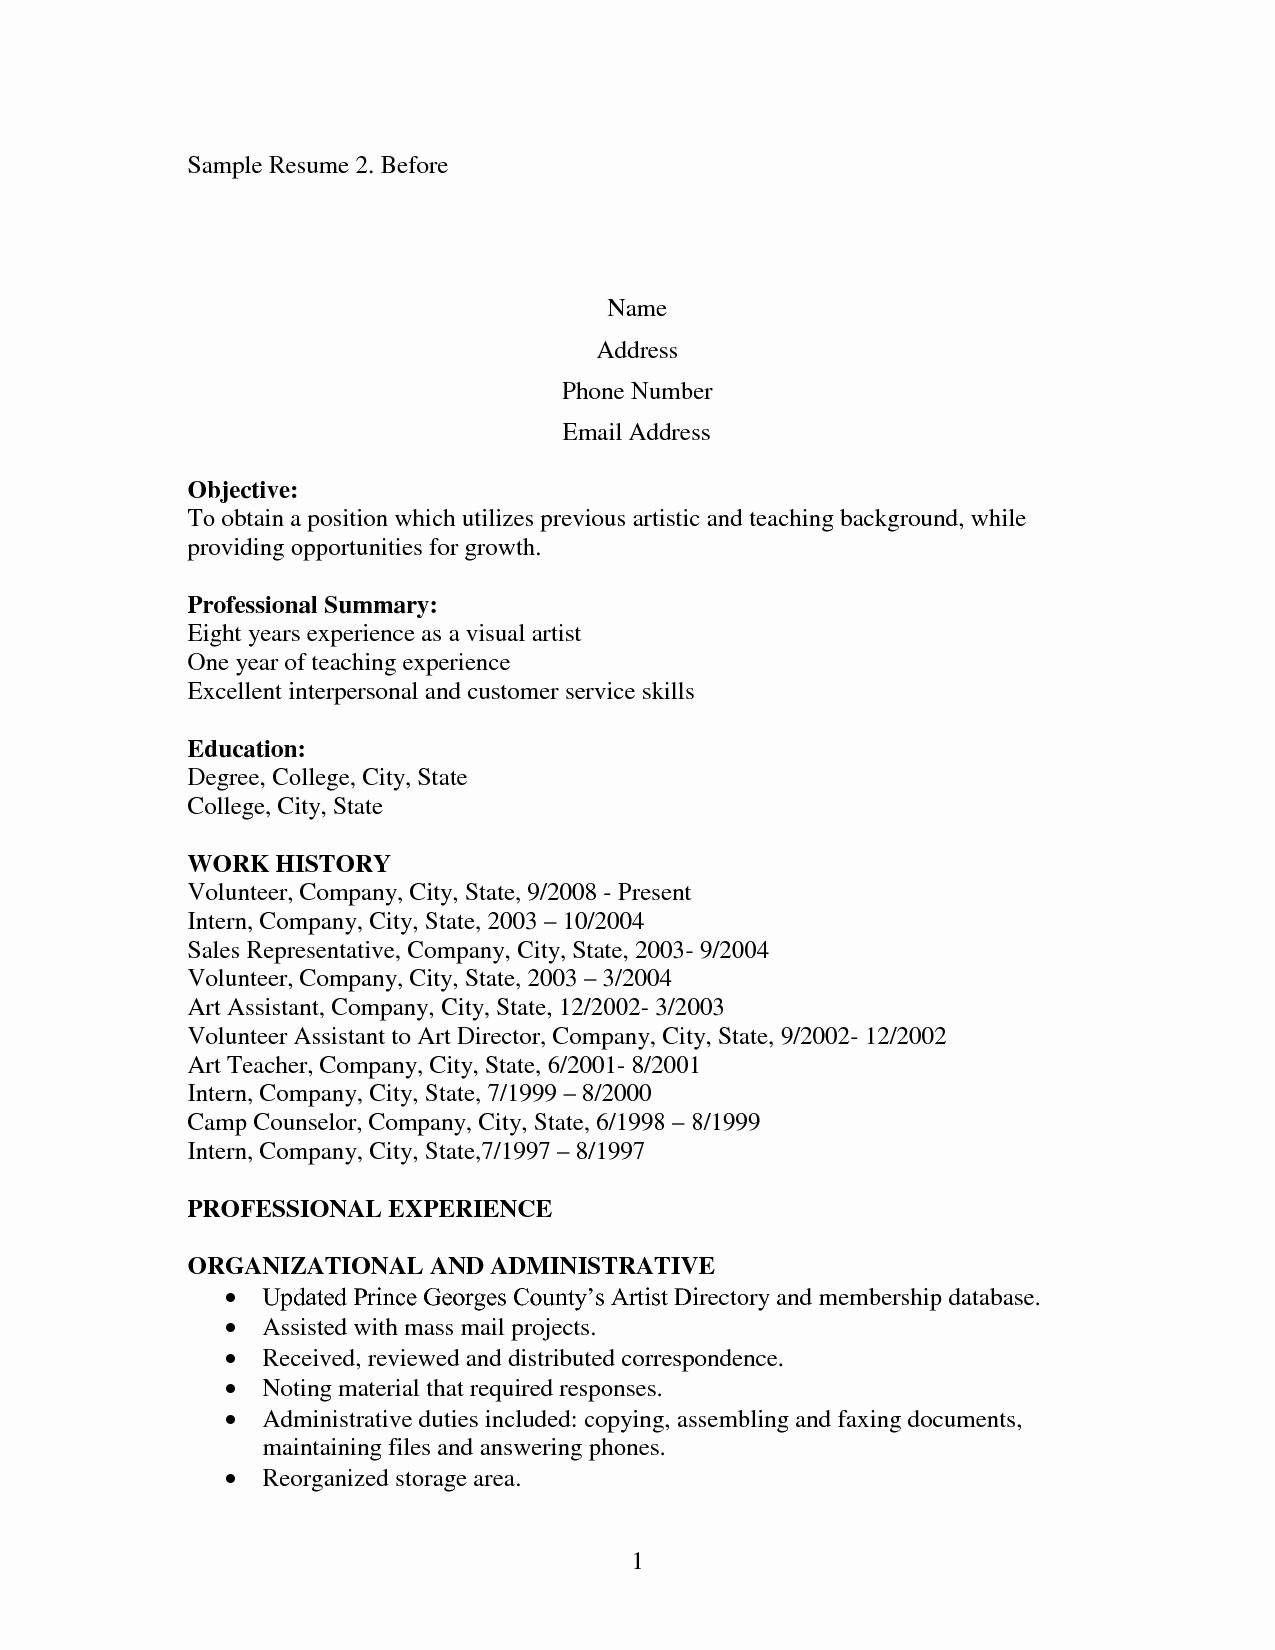 Resume Templates for Mums Returning to Work Sample Resume for Housewife Returning to Work Sample Resume for …